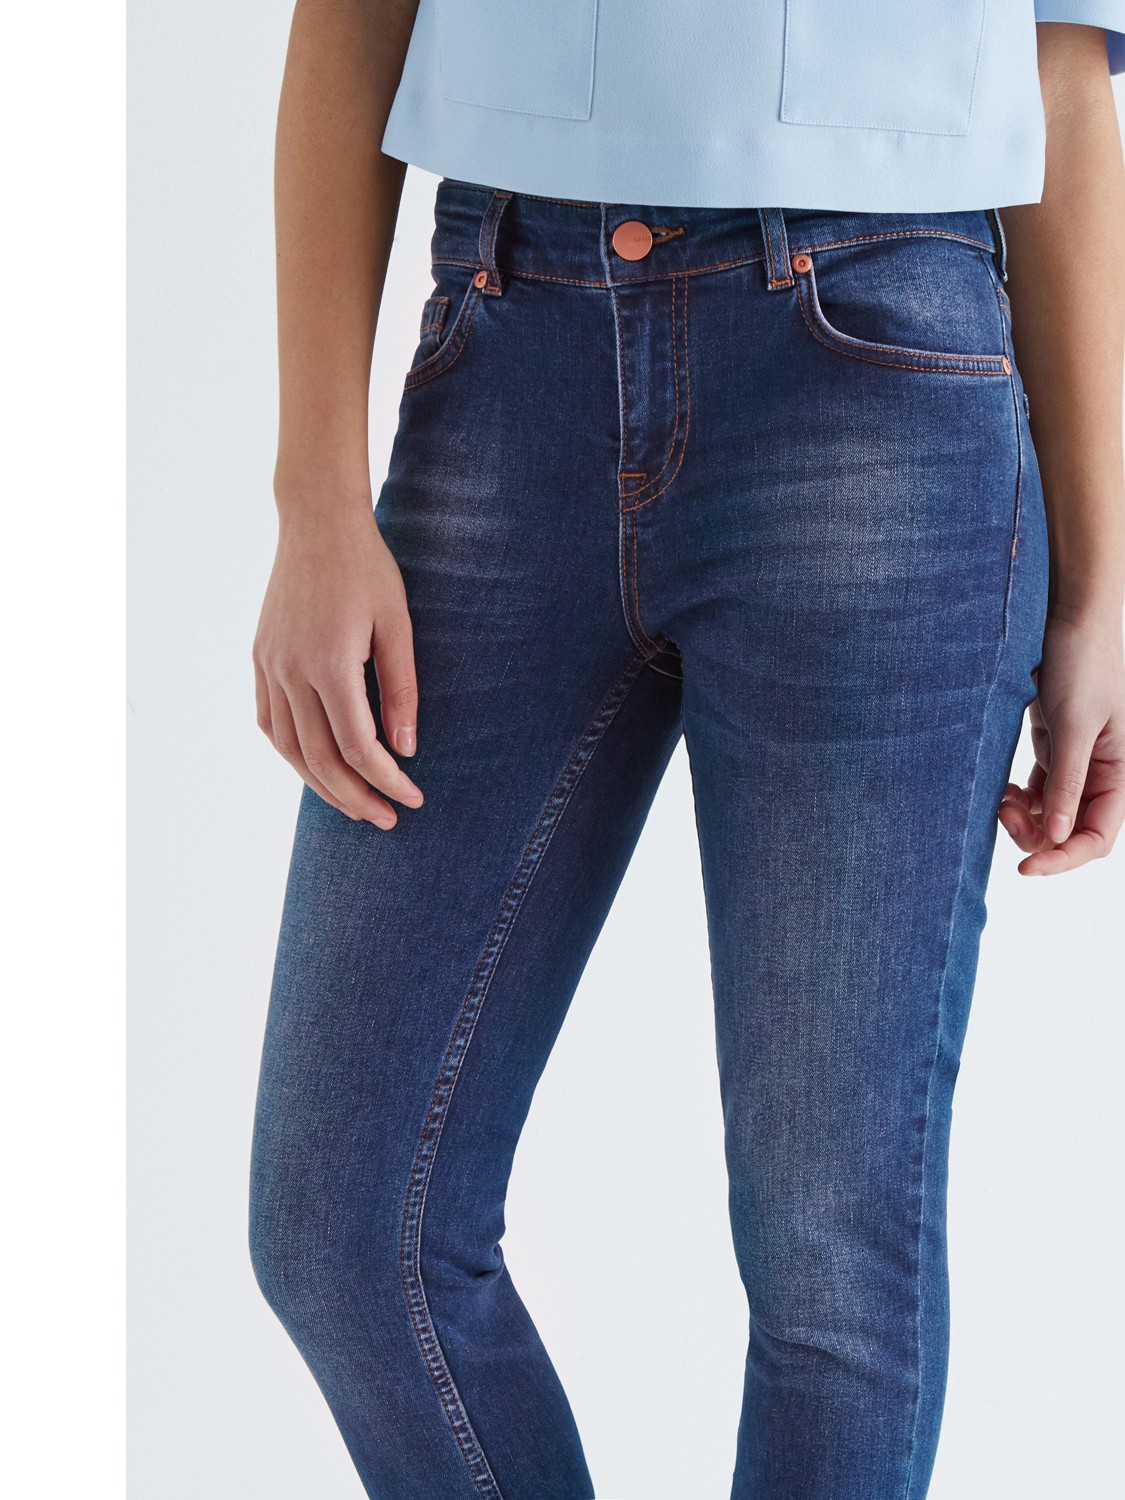 Oasis Isabella Skinny Crop Jeans in Mid Wash (Blue) - Lyst